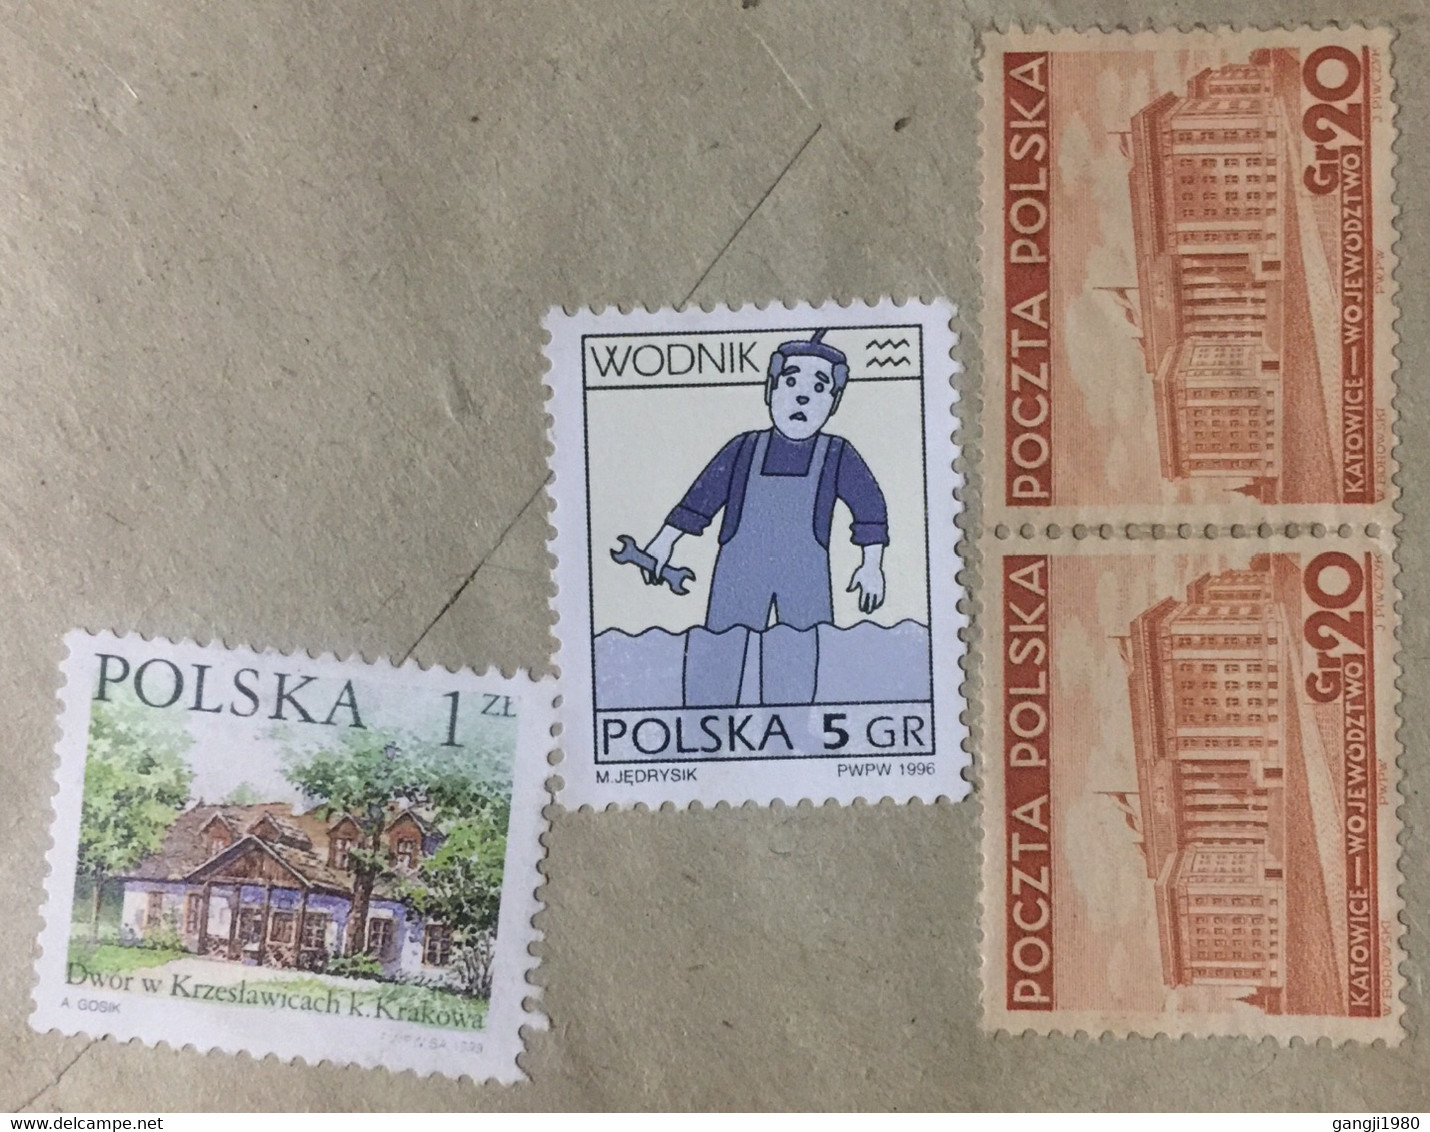 POLAND 2000, USED AIRMAIL COVER TO INDIA 4 DIFFERENT 1958 PICTURAL SPECIAL CANCELLATION, KATOWIDE ,HOUSE MUSIC,BUILDIN, - Storia Postale